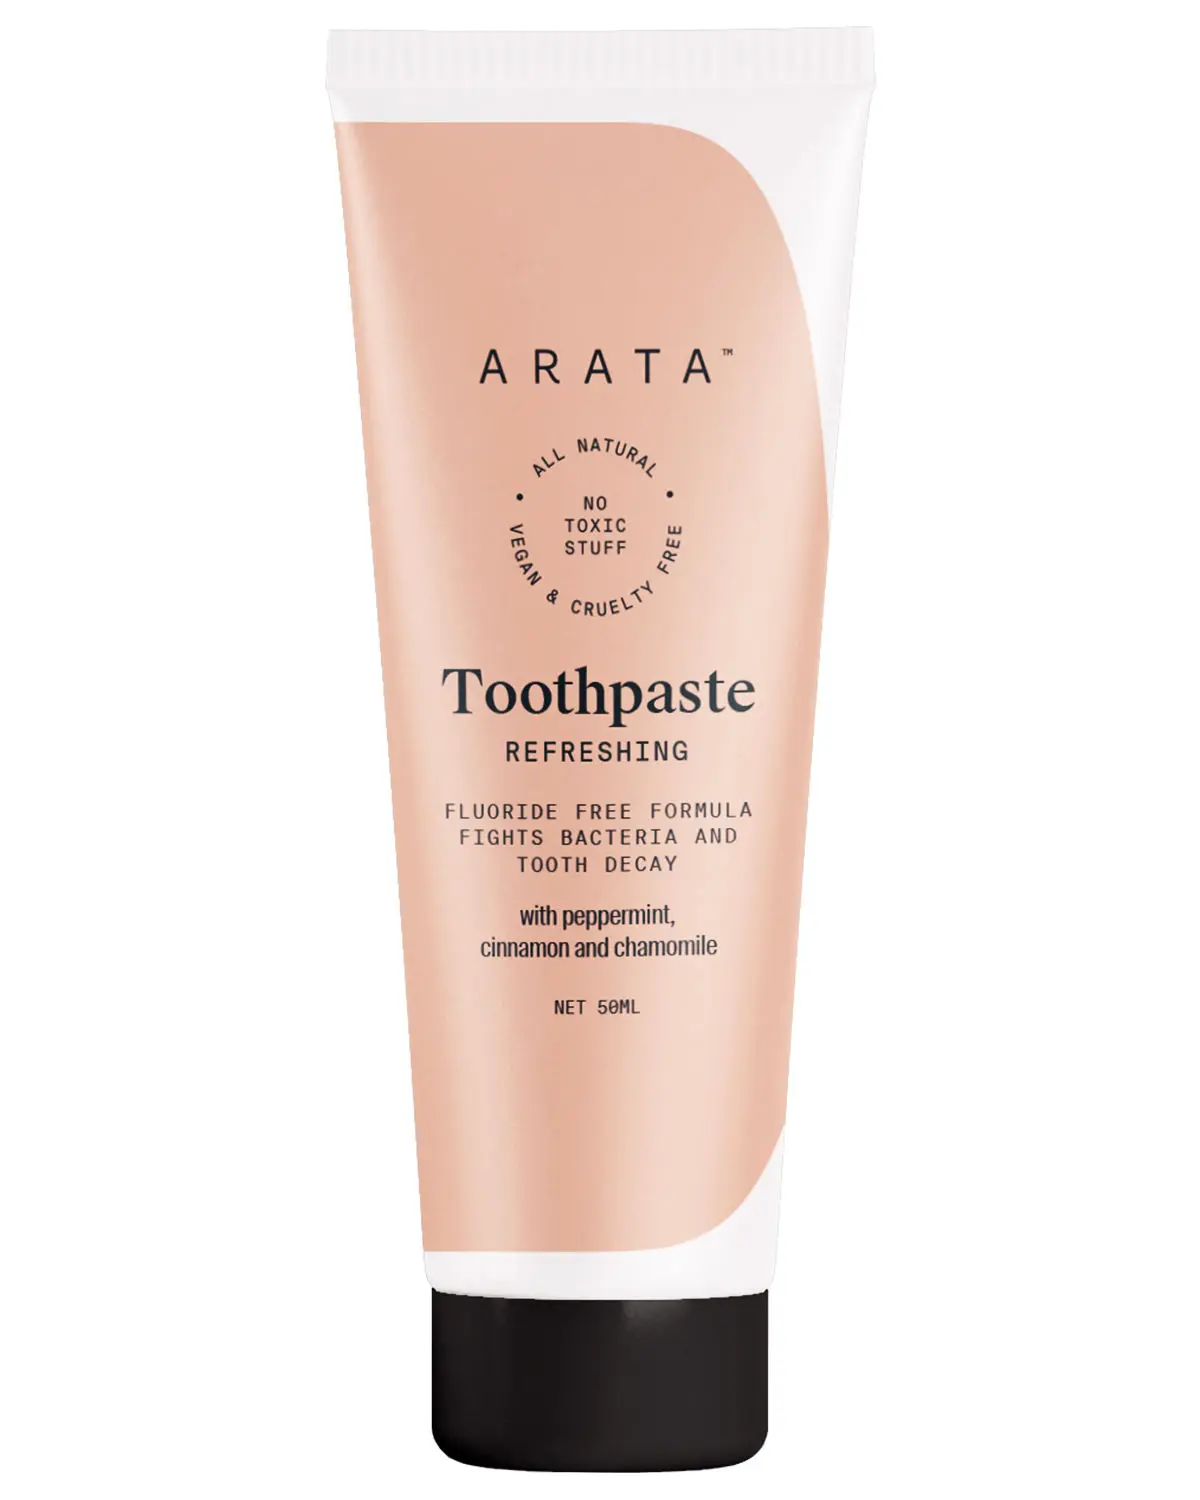 Arata Natural Refreshing Toothpaste With Peppermint, Cinnamon & Chamomile | All-Natural, Vegan & Cruelty-Free | Fluoride-Free Formula Fights Bacteria & Tooth Decay (50 ml)